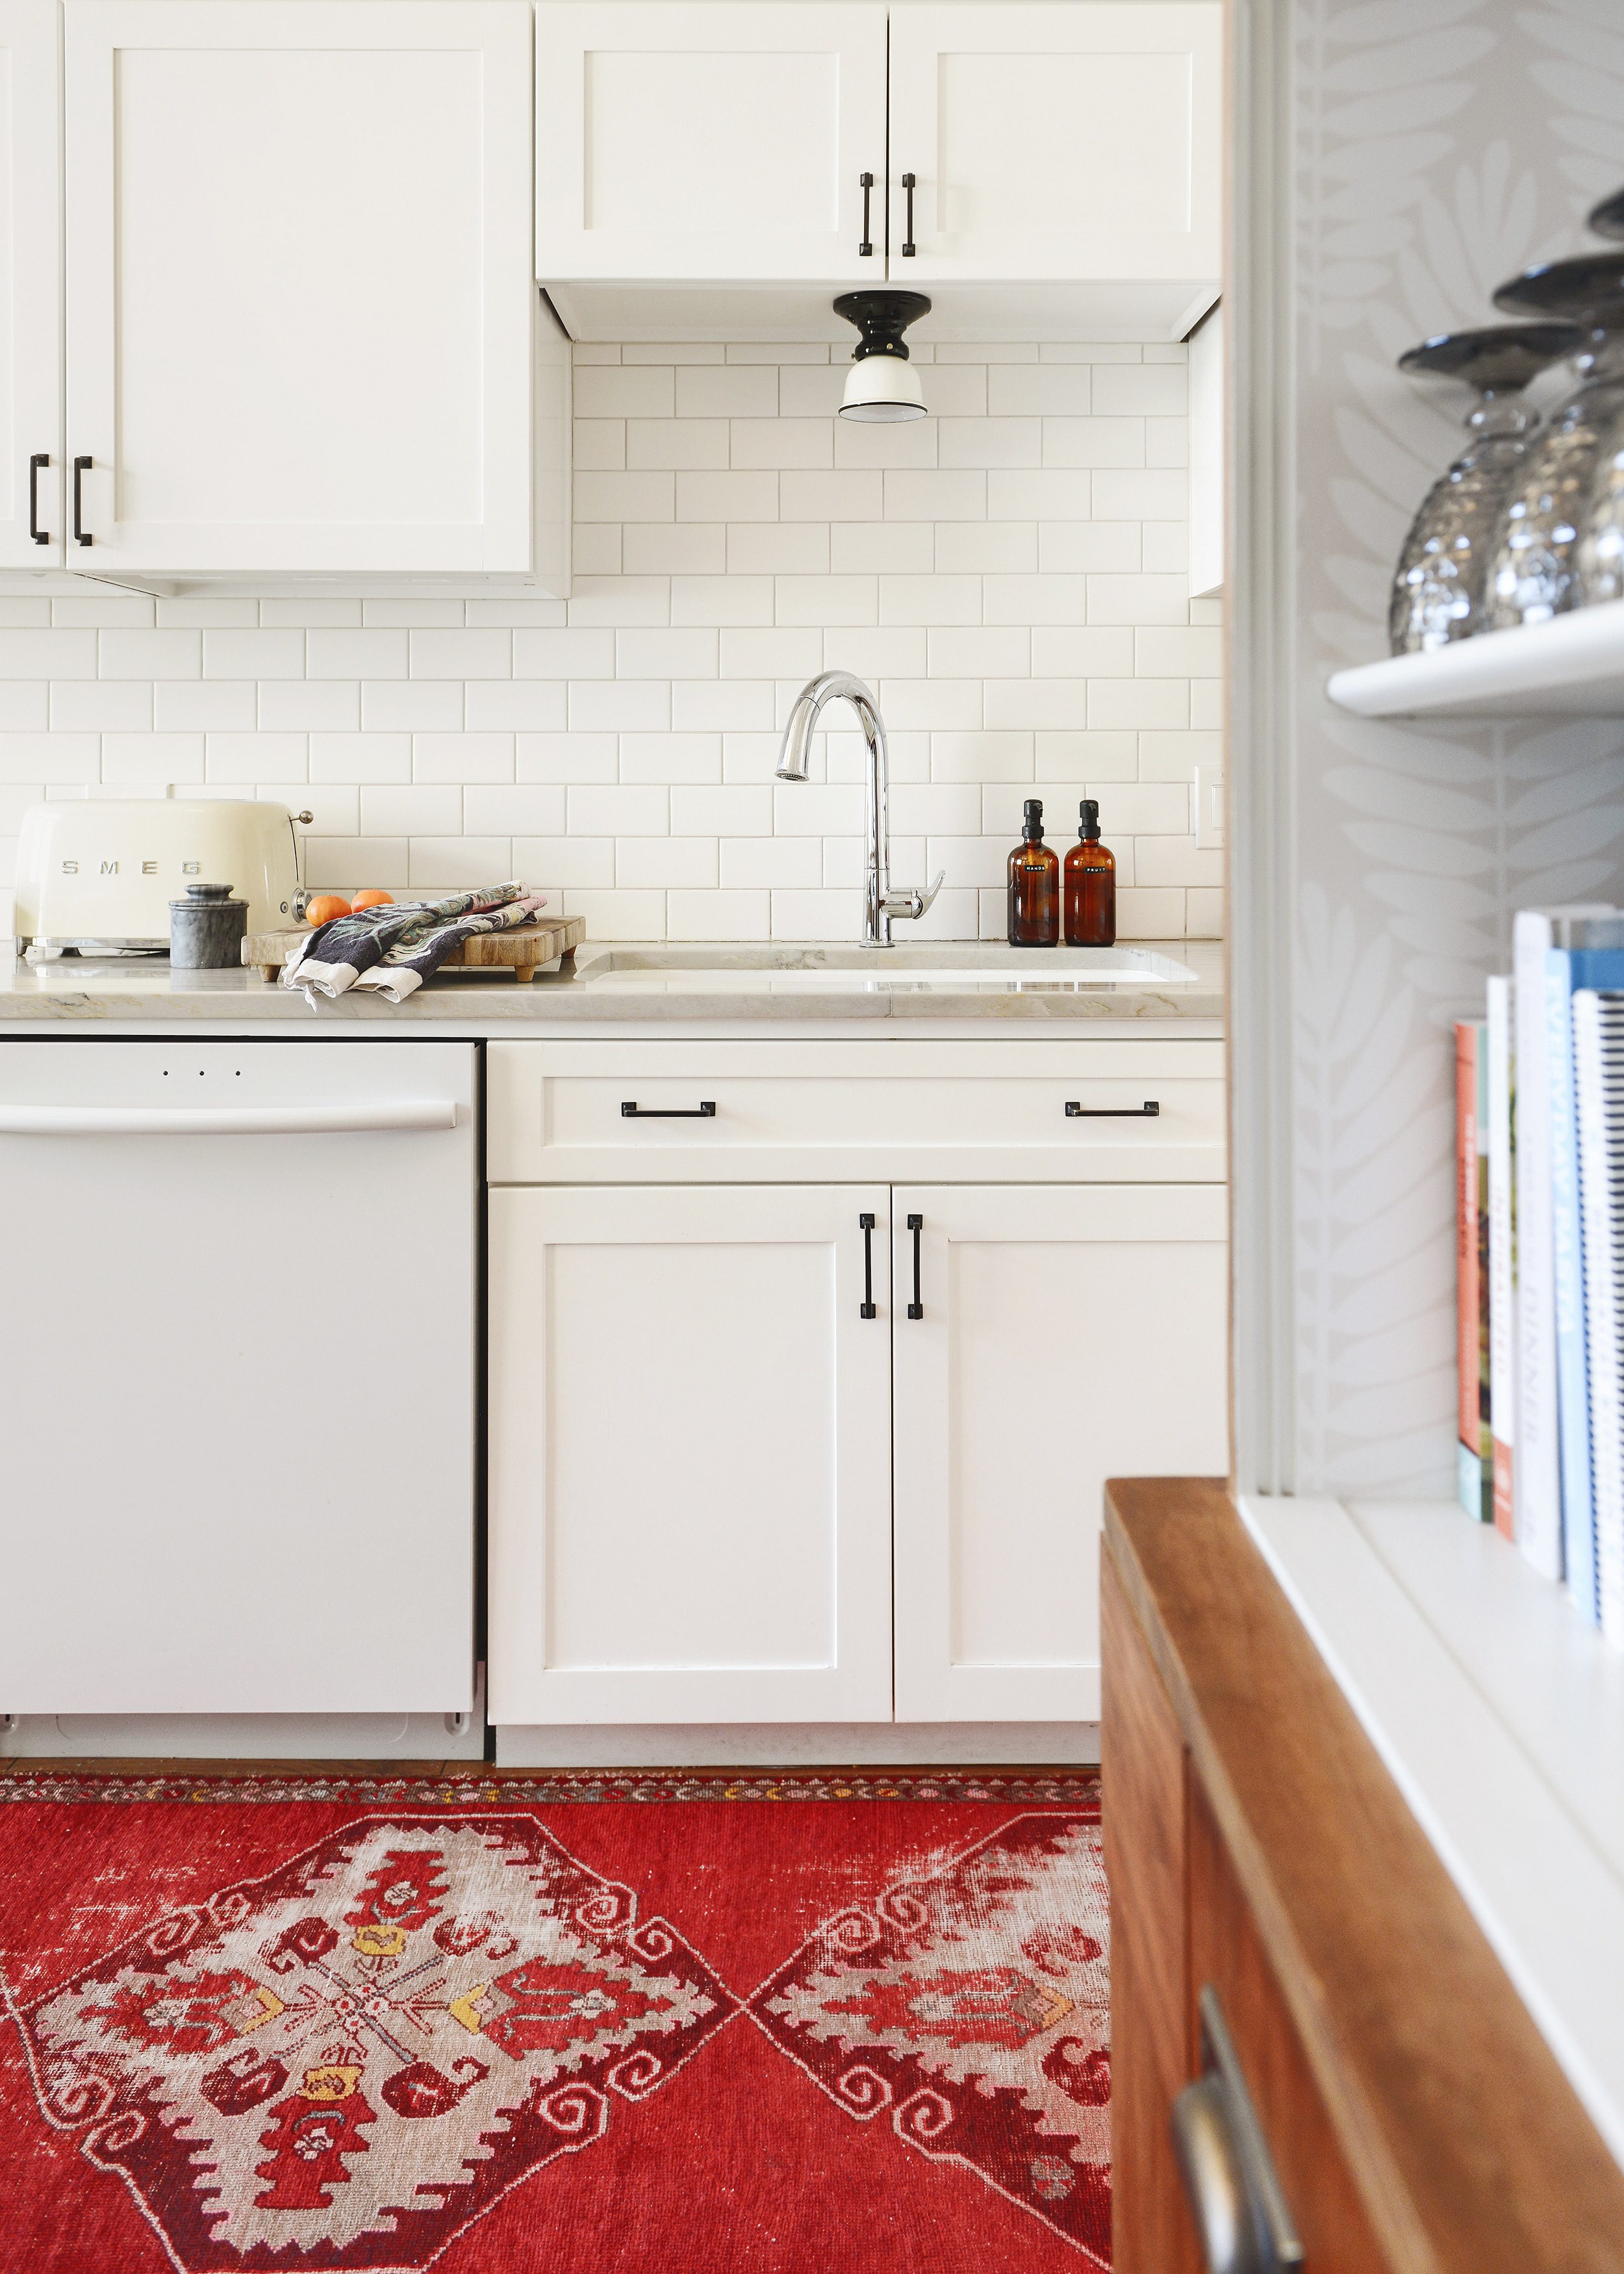 White kitchen with red vintage runner, chrome faucet and oil rubbed bronze hardware. | via Yellow Brick Home